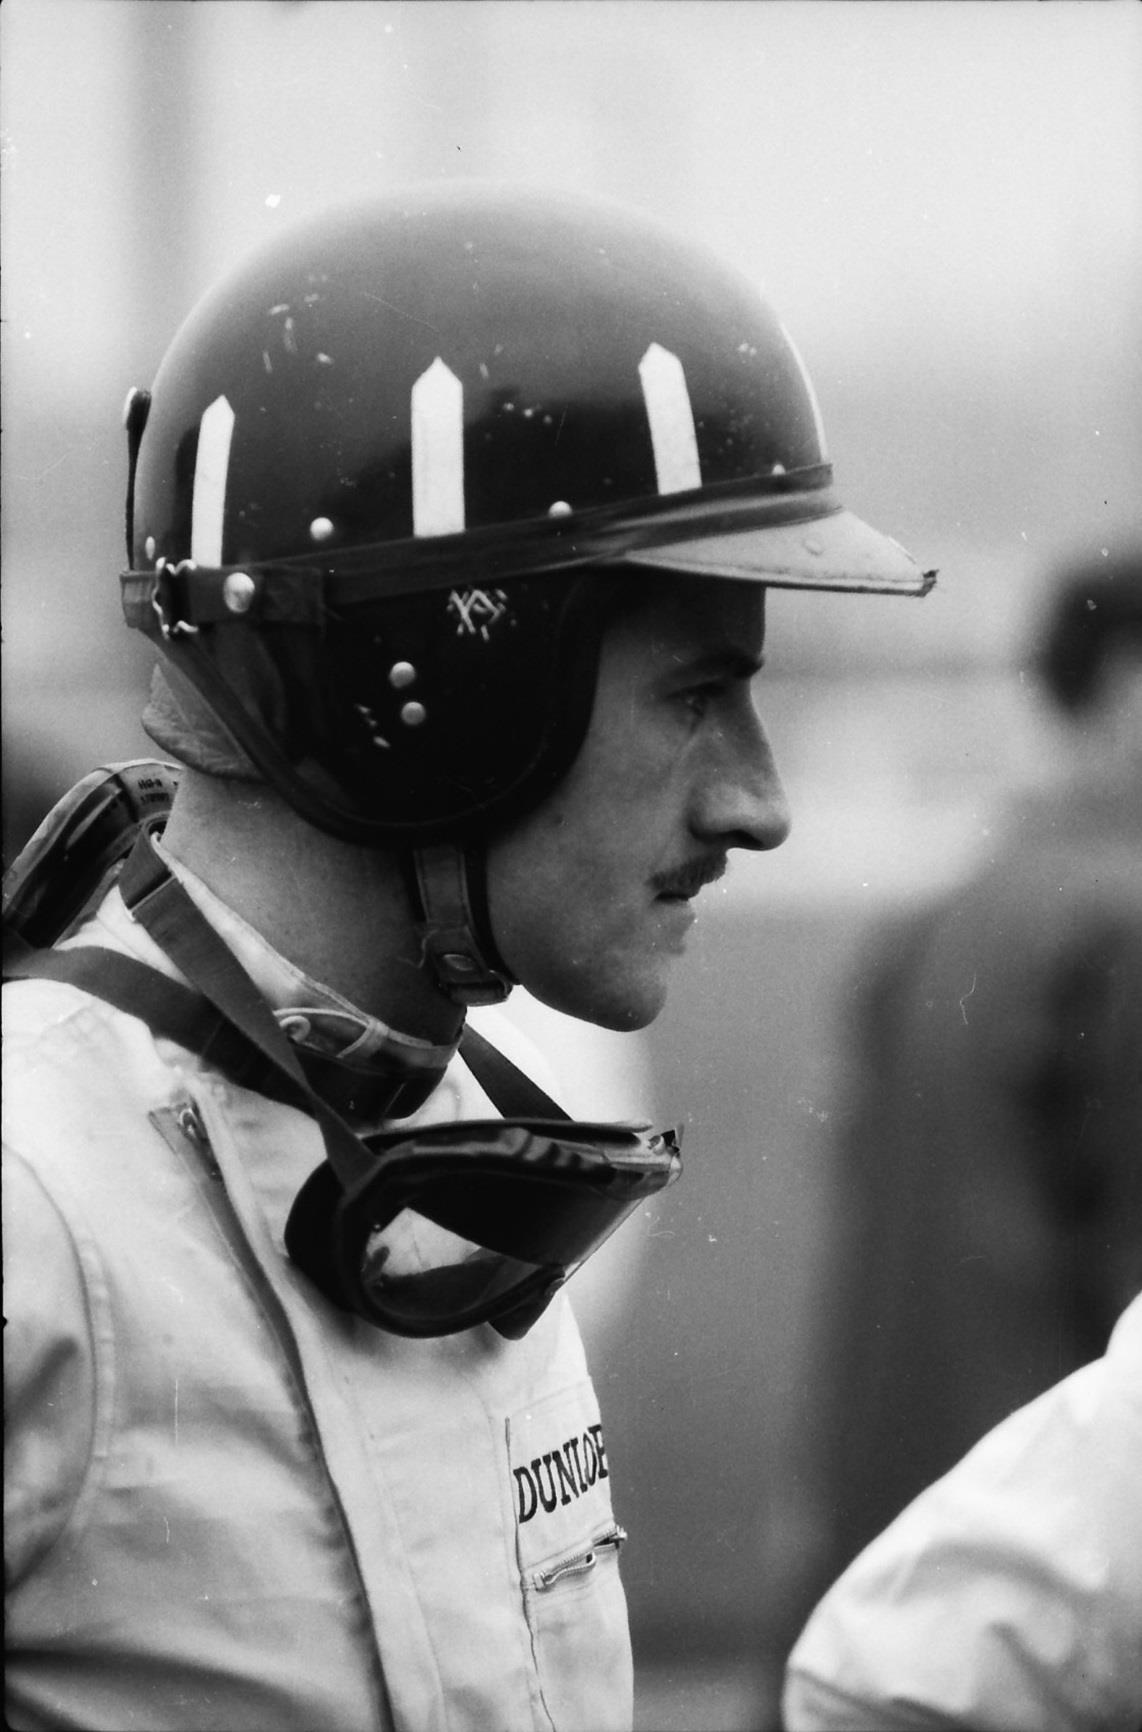 Graham Hill with his familiar London Rowing Club helmet